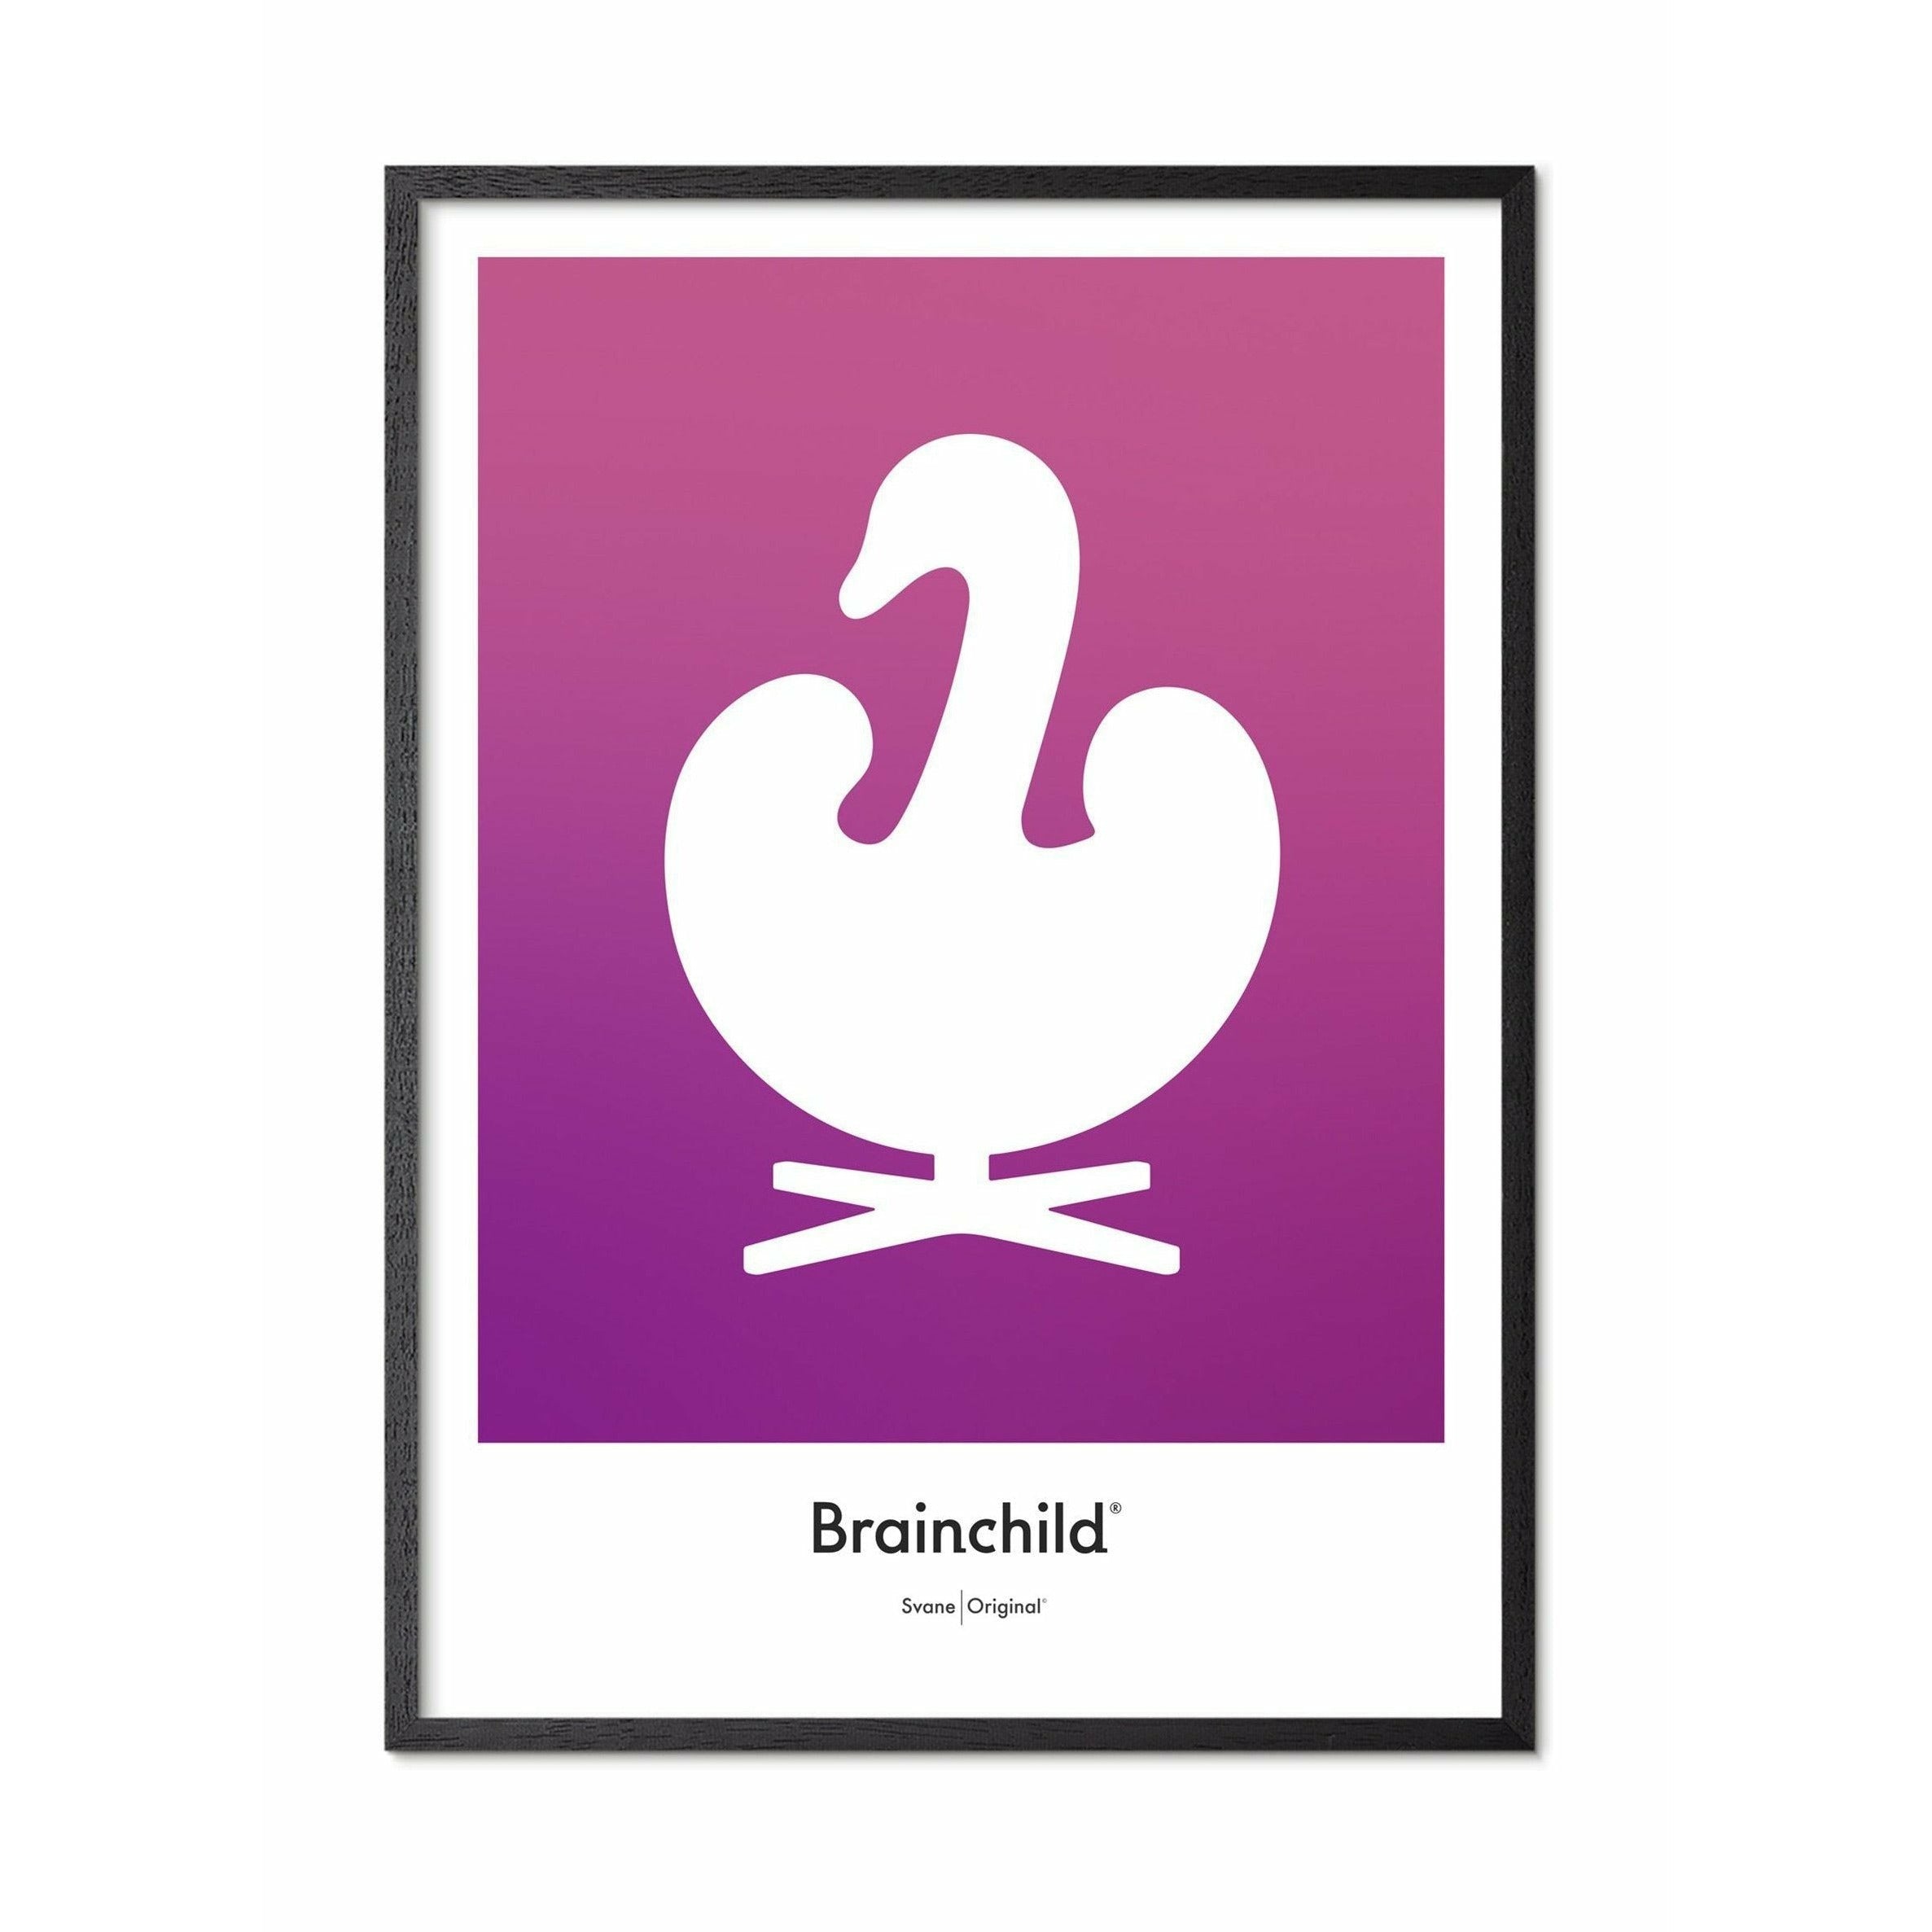 Brainchild Swan Design Icon Poster, Frame Made Of Black Lacquered Wood 50x70 Cm, Purple